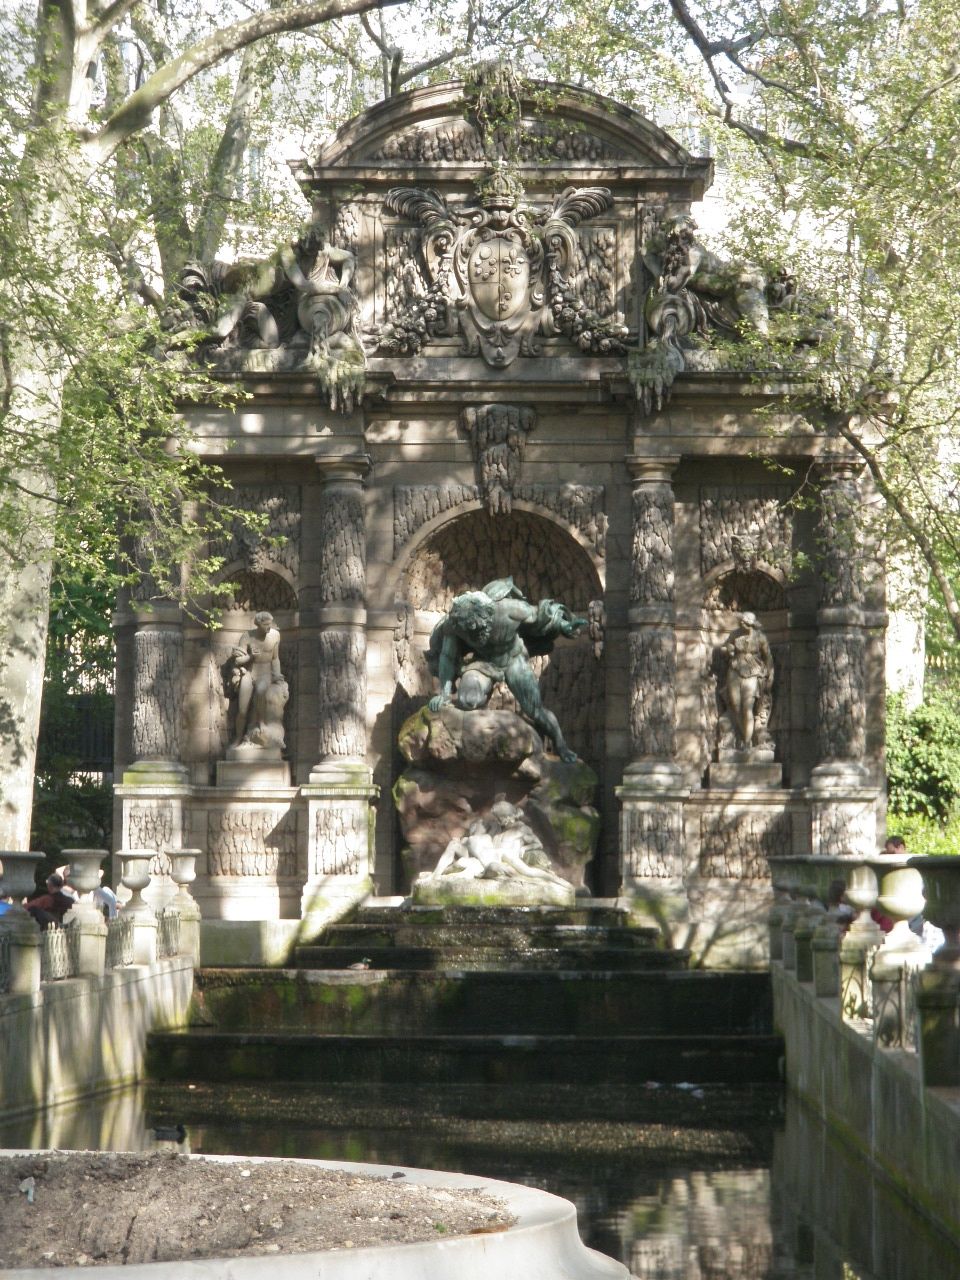 The Statue of Zeus in the Luxembourg